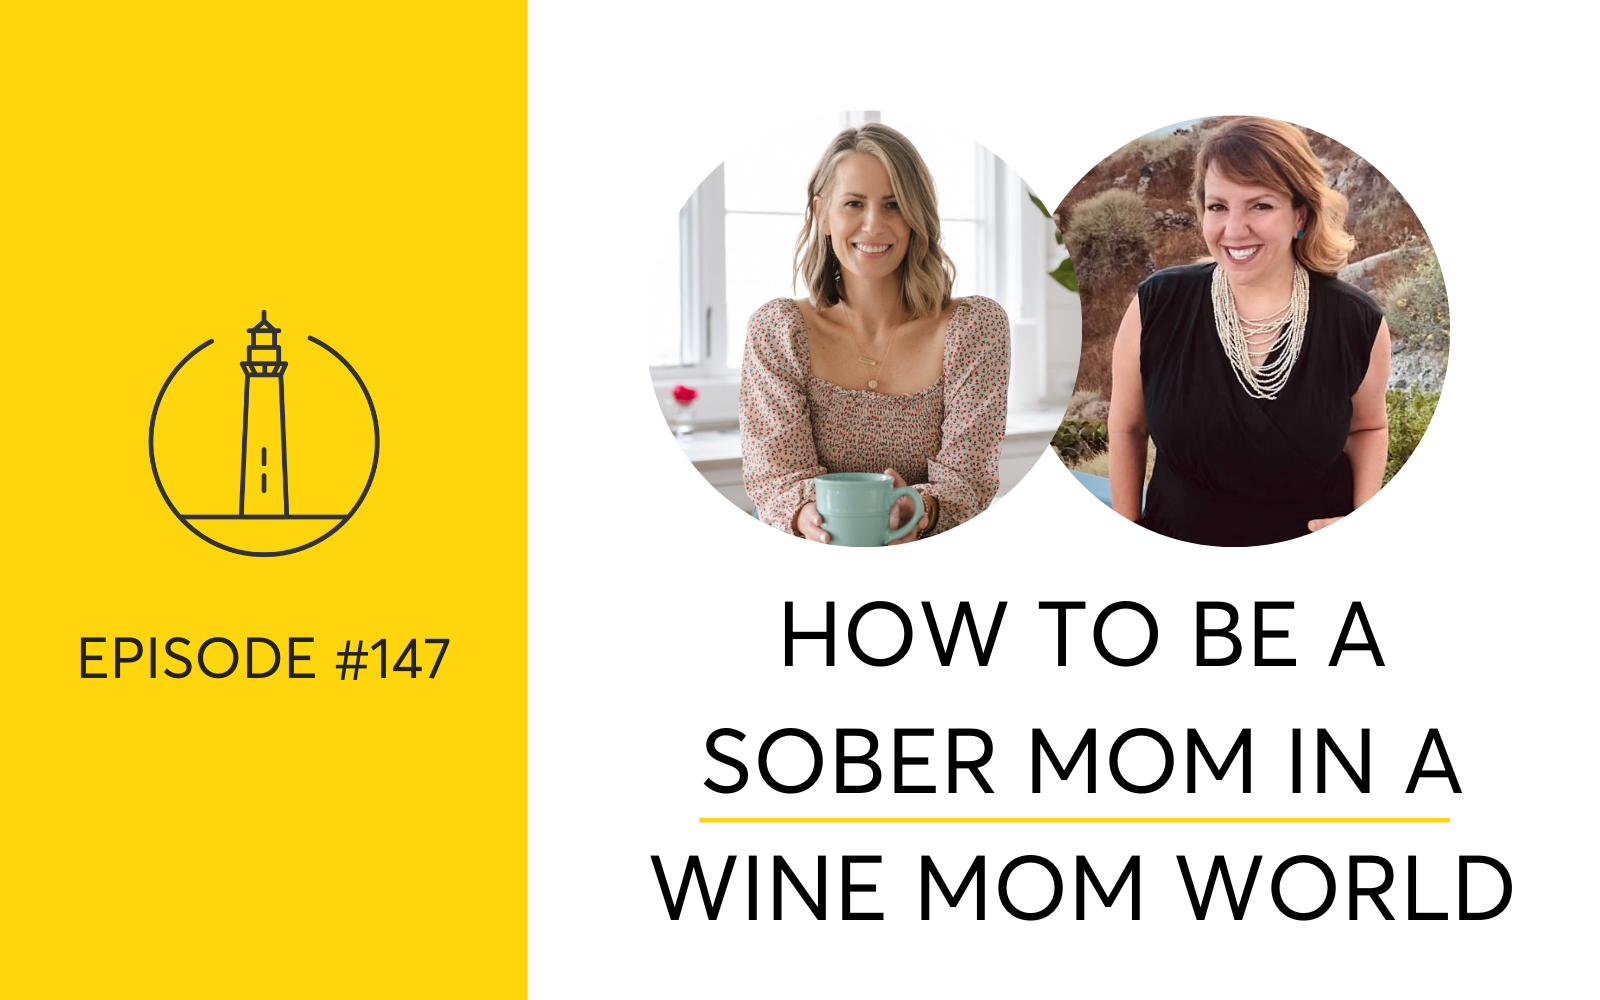 How To Be A Sober Mom In A Wine Mom World